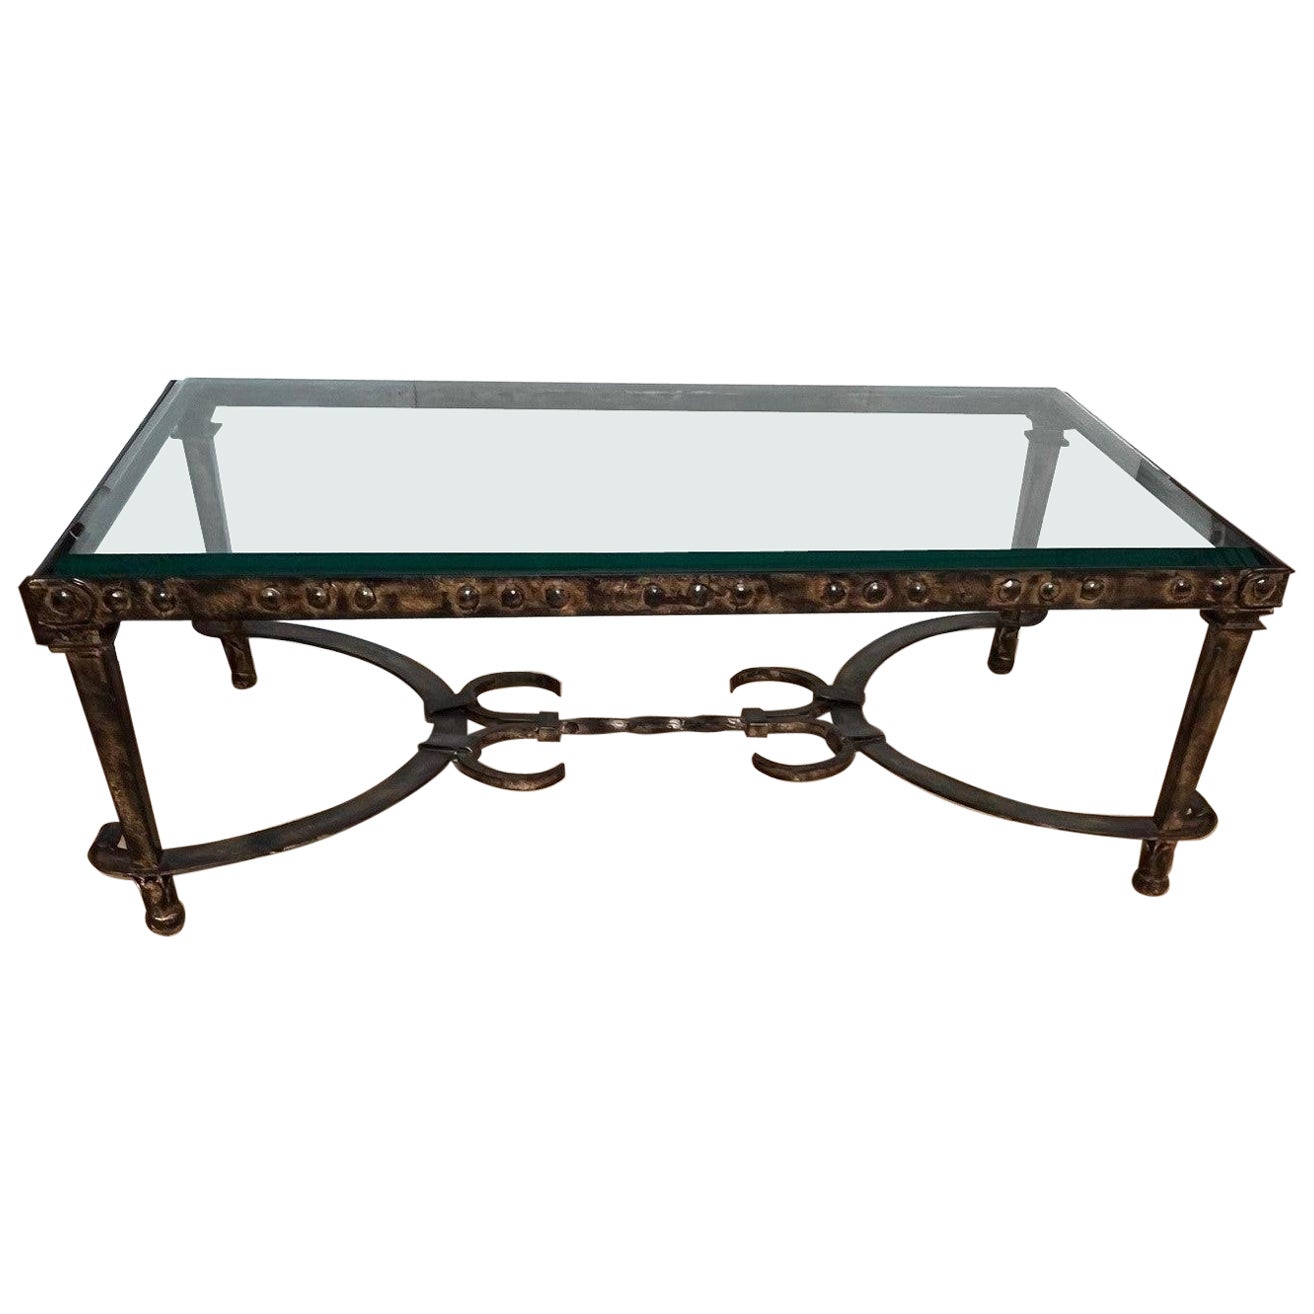 Made to Order Forged Iron Calais Coffee Table with 1/4" Beveled Glass Top For Sale